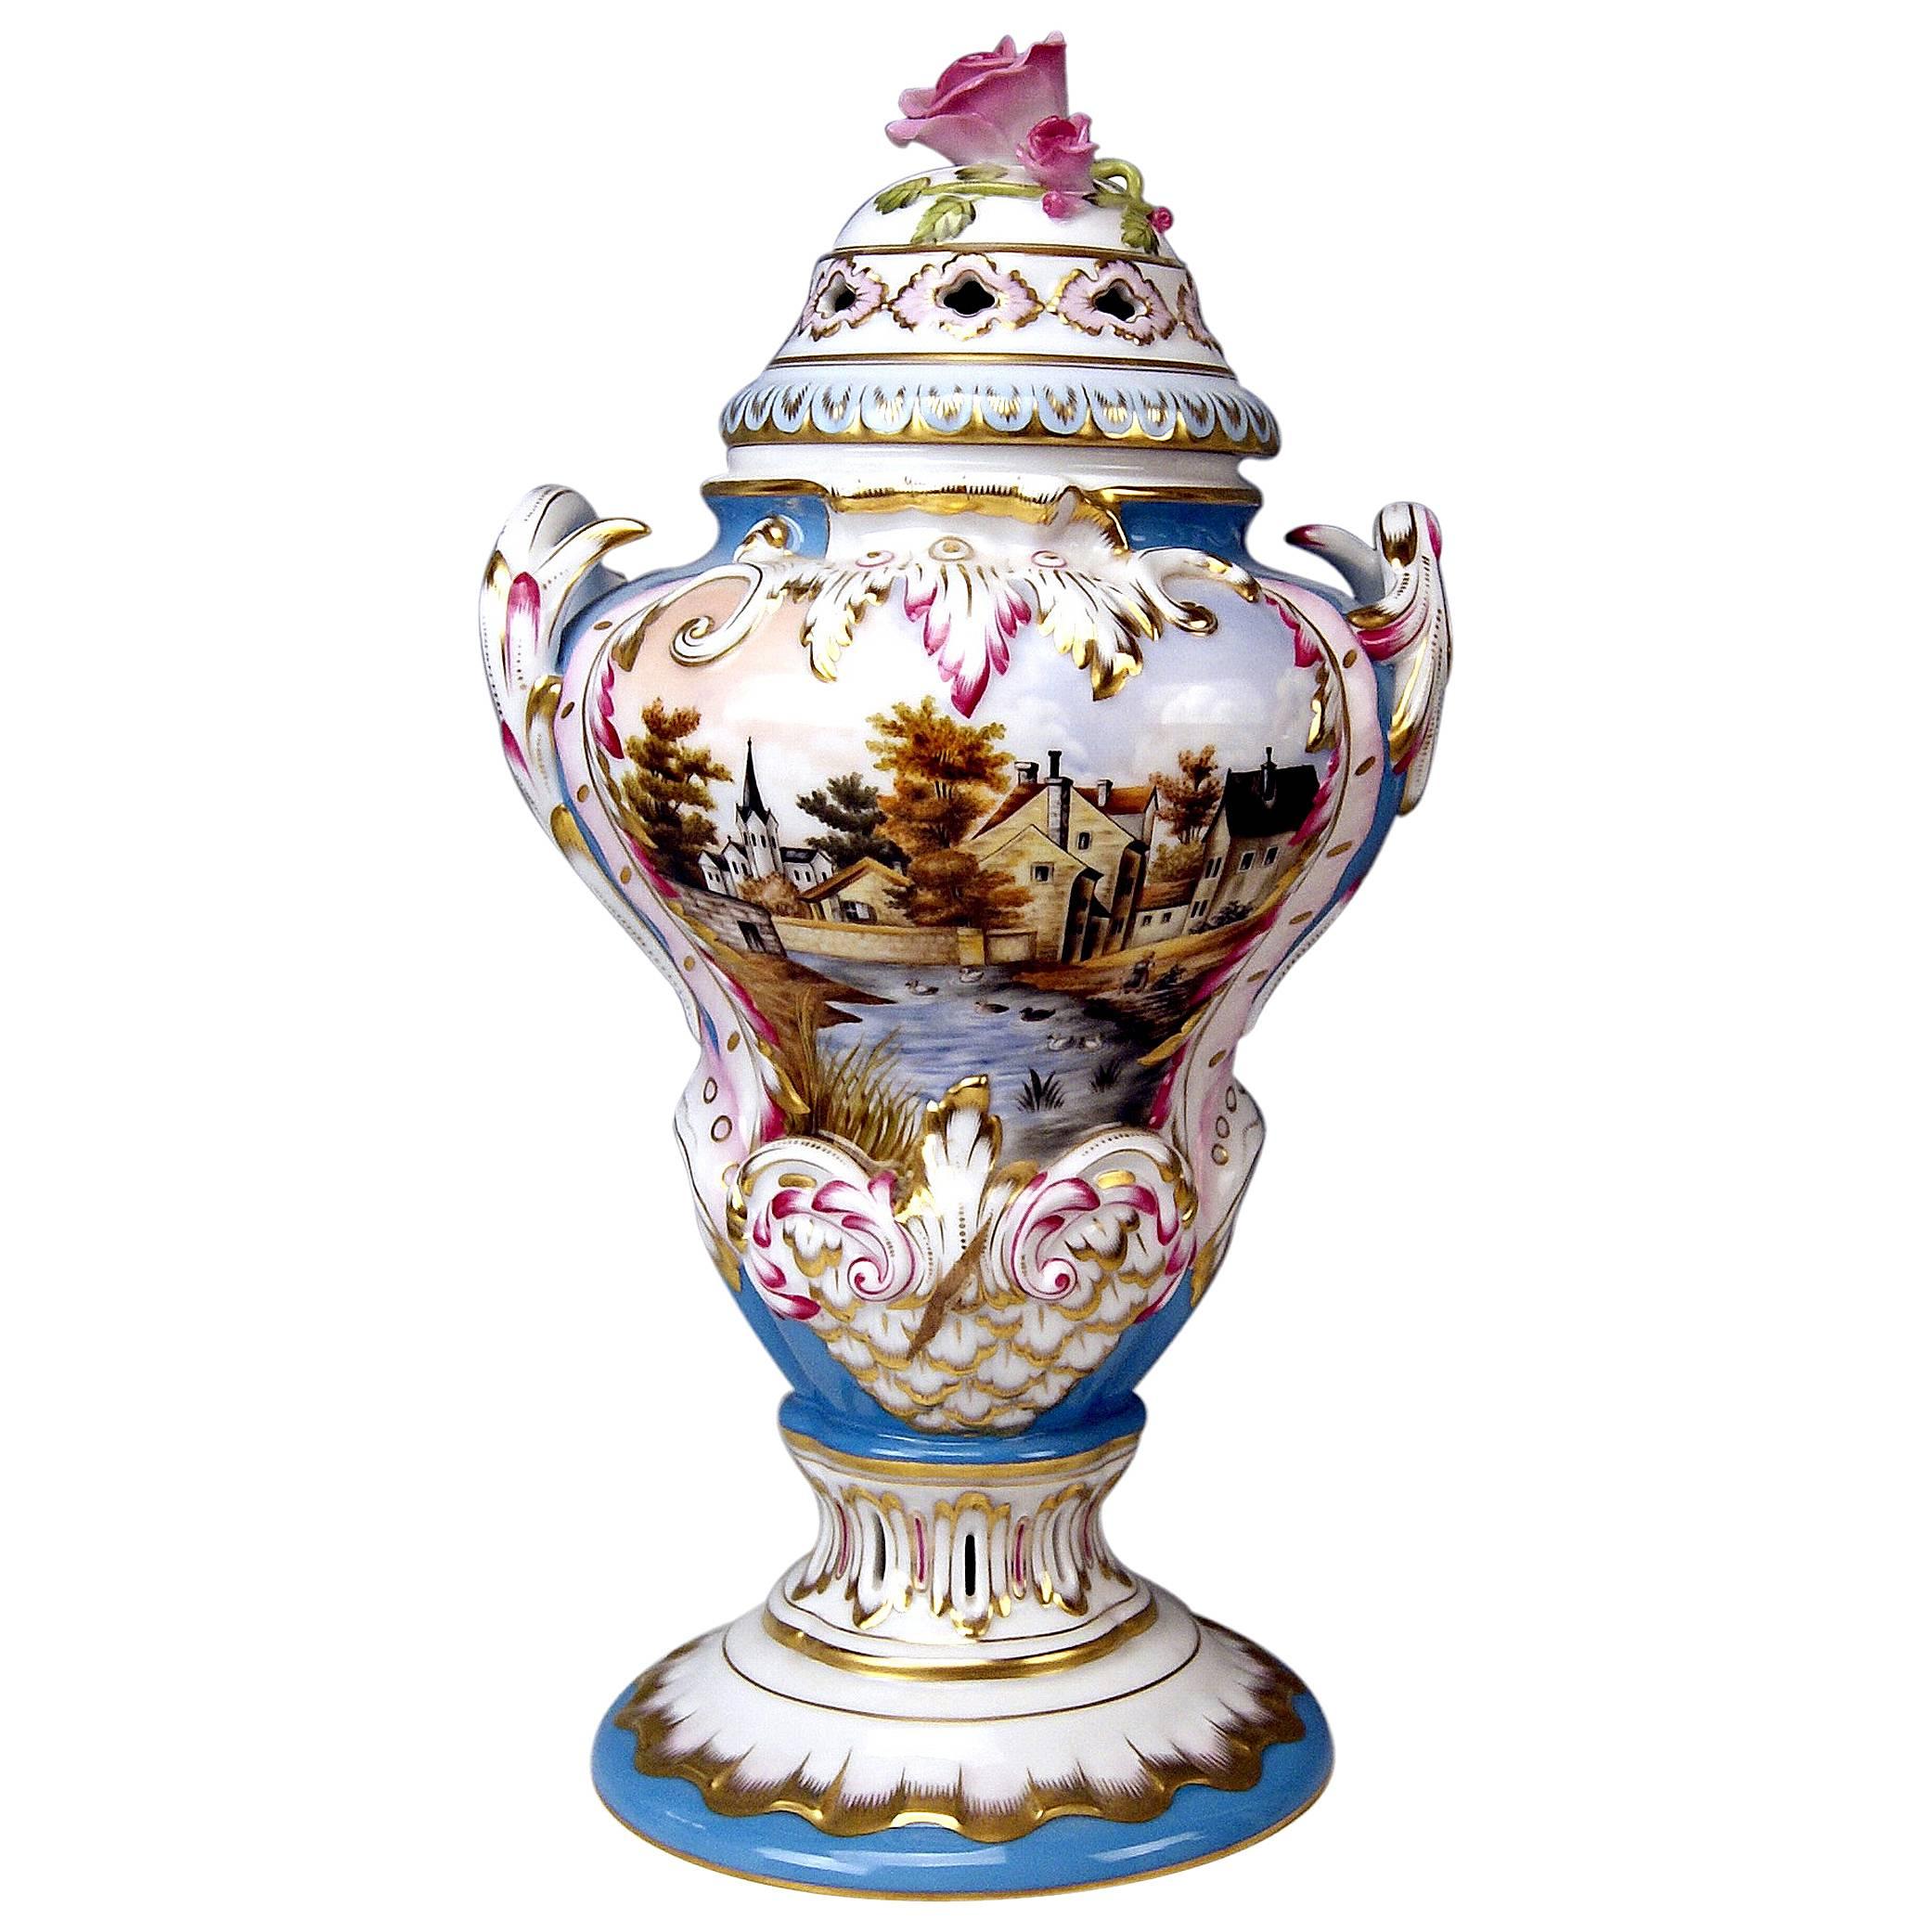 Herend Lidded Vase Picture Paintings by Istvan Lazar (1993), Height:14.76 inches